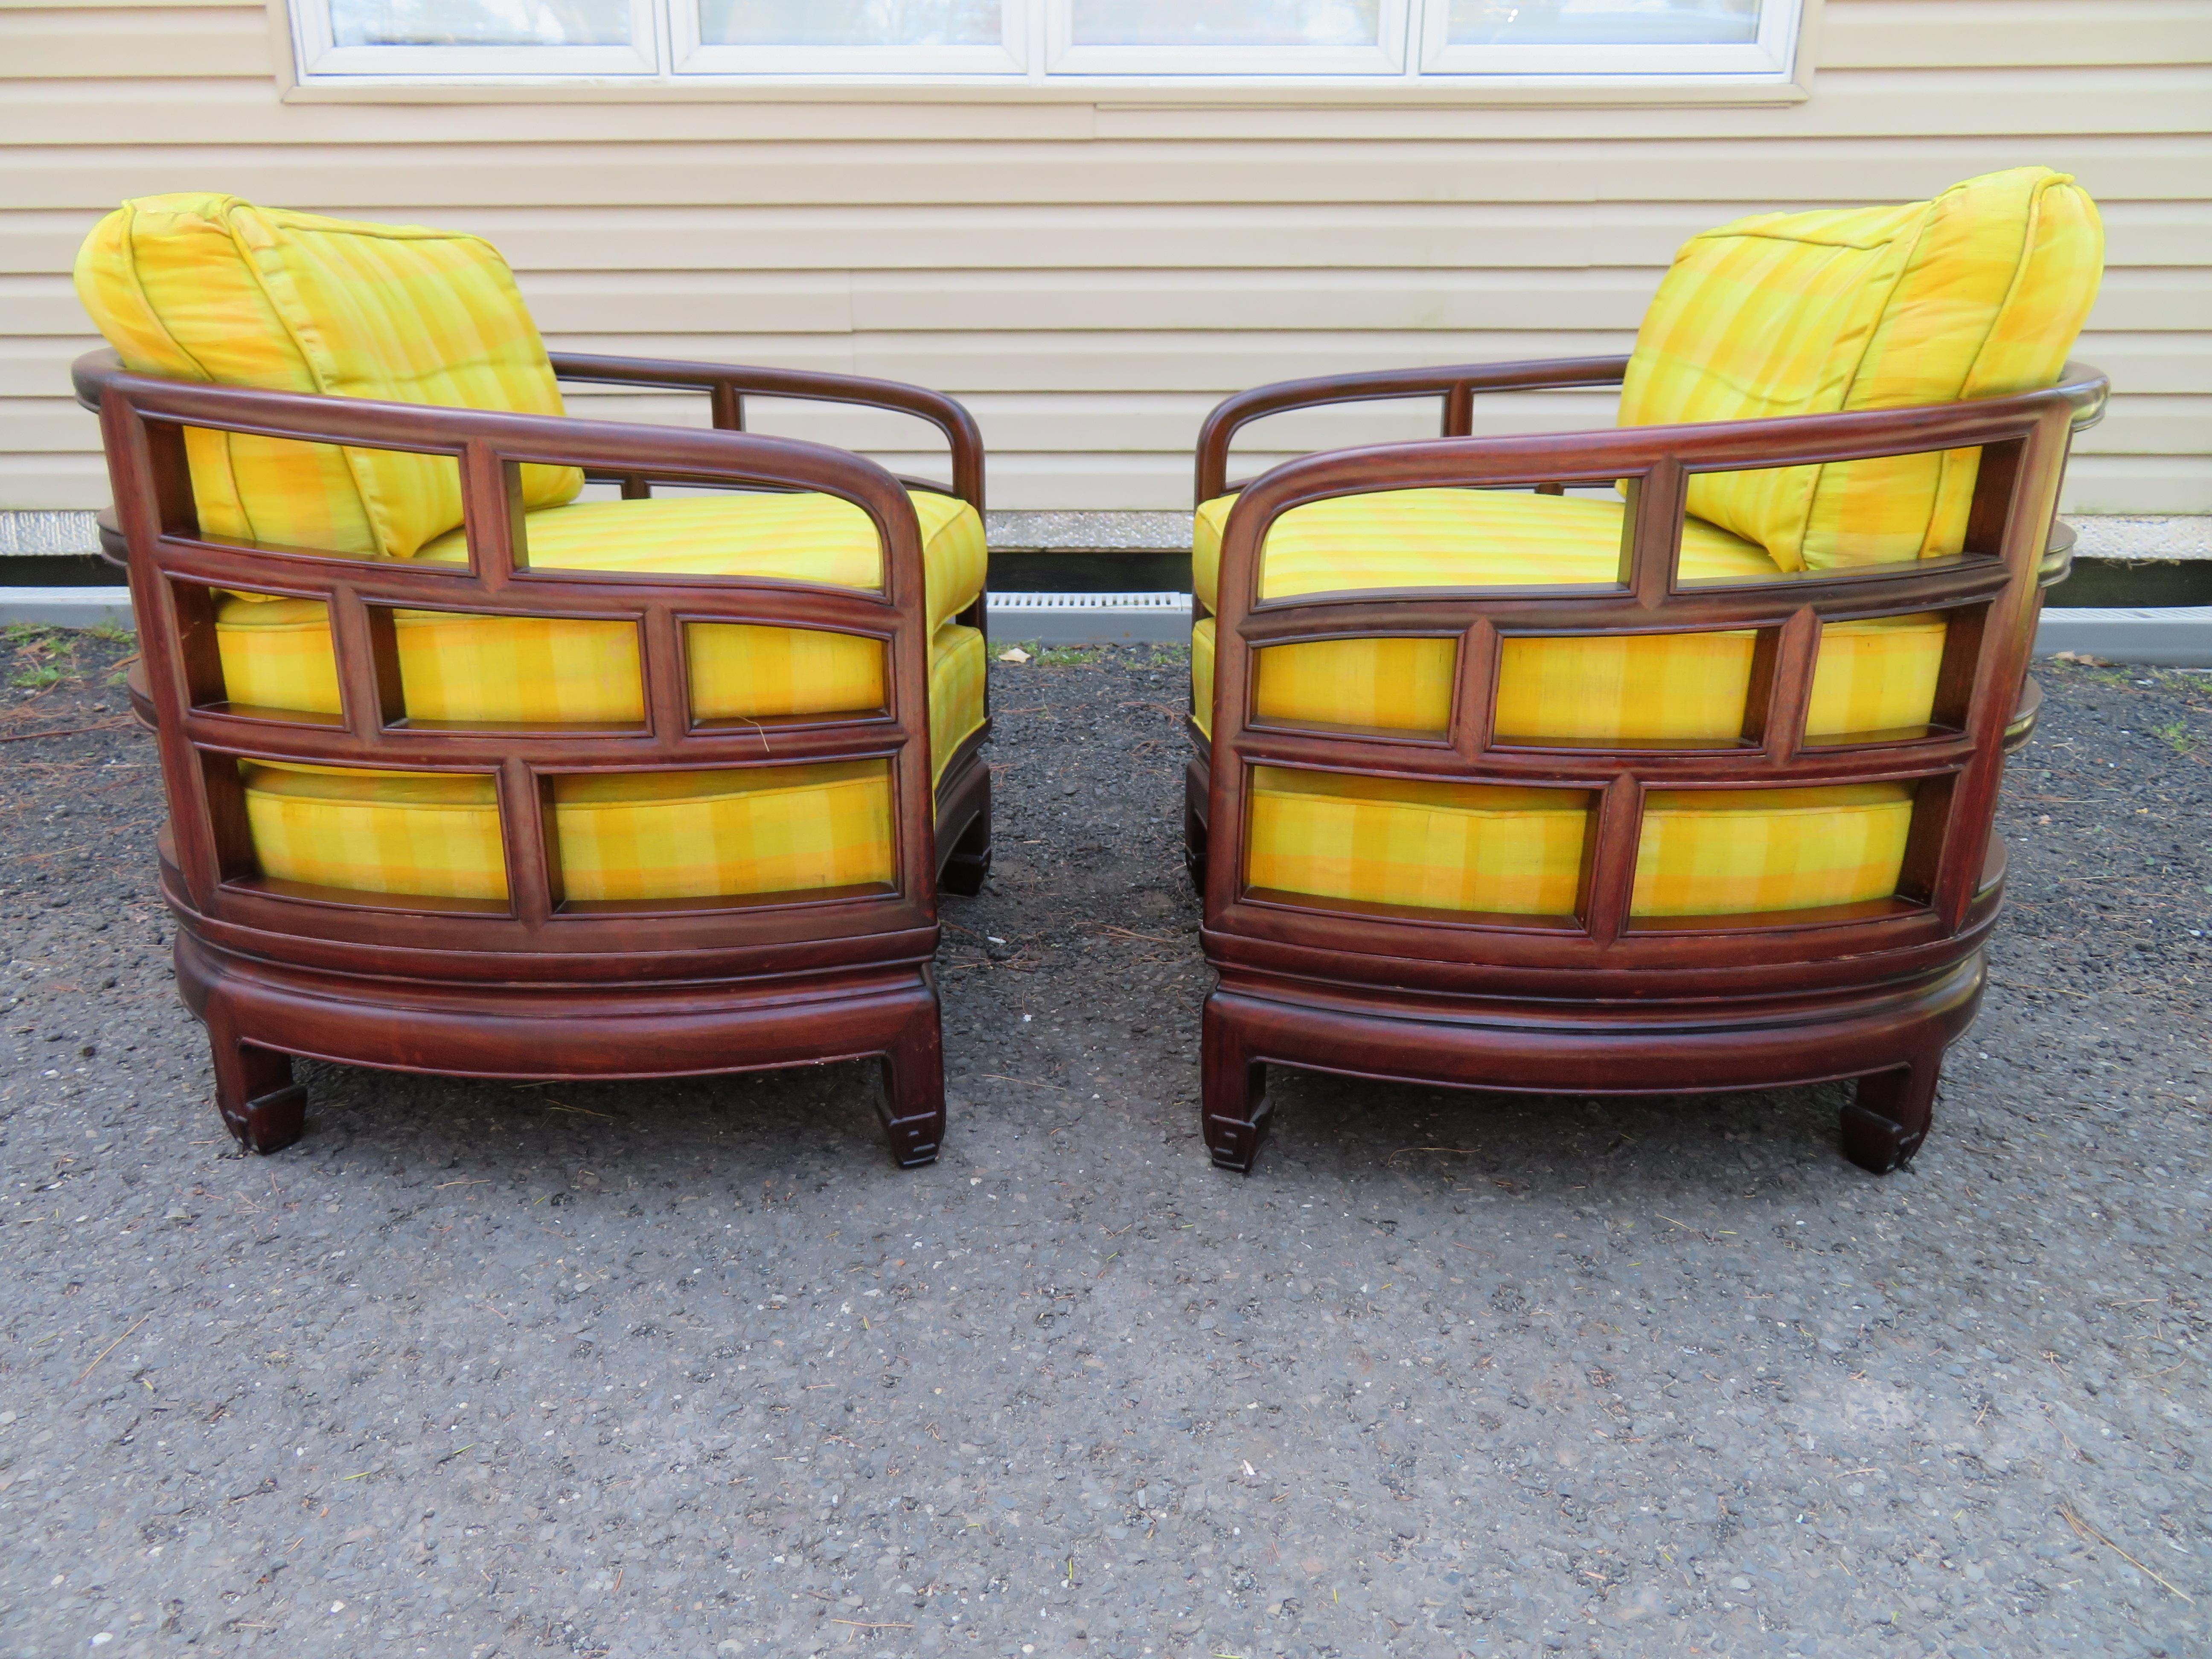 Stunning pair of barrel back Chinoiserie rosewood lounge chairs. These Fine chairs are upholstered in gorgeous yellow plaid taffeta fabric in usable vintage condition. We do have 2 pairs if multiples are needed- see the last photos to see the other